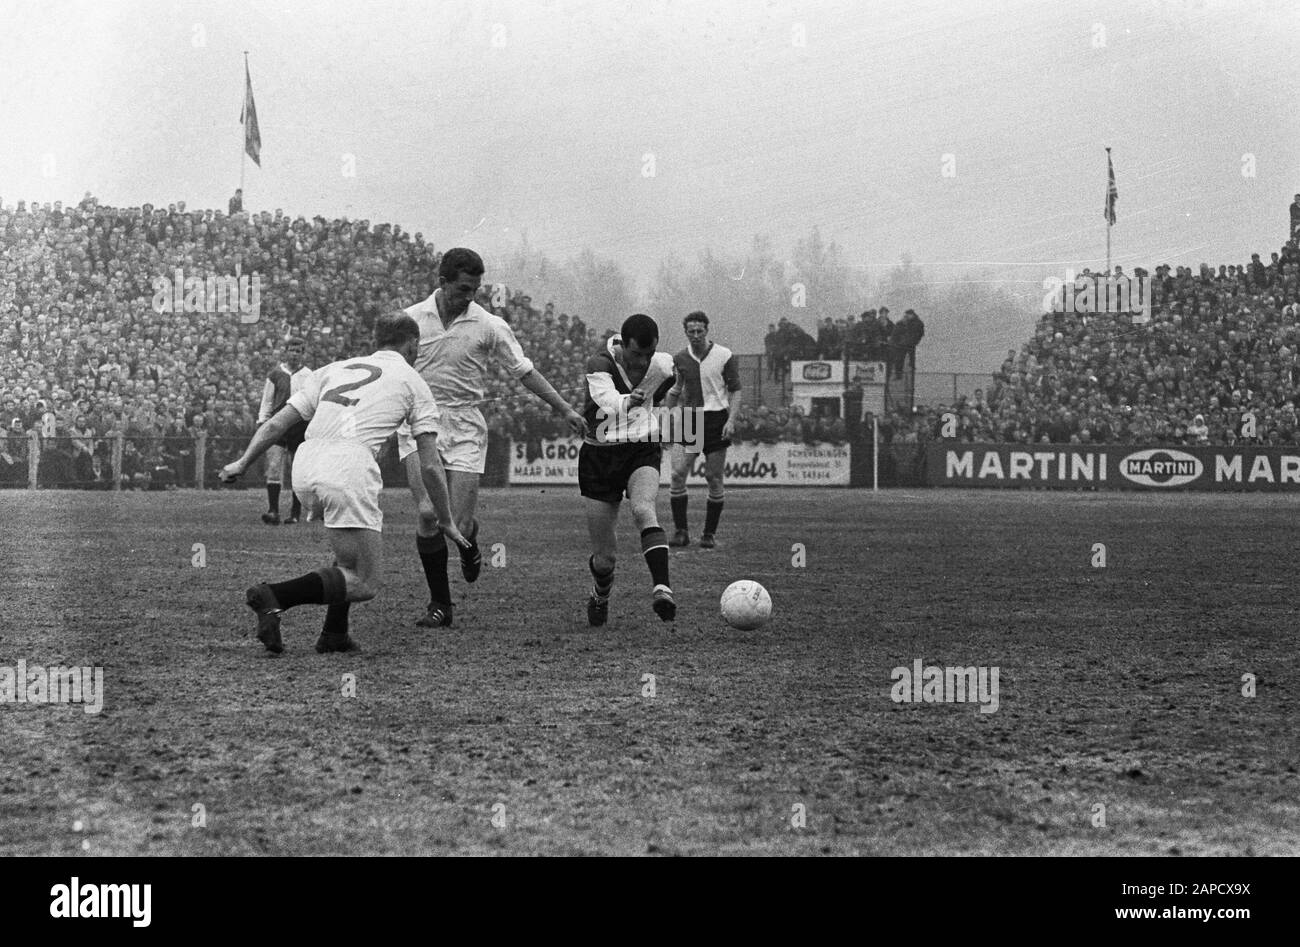 ADO vs. Feijenoord 1-1, game moment, Coen Moulijn shoots Date: April 28, 1963 Location: The Hague Keywords: sport, football Person name: Moulijn, Coen Institution name: Feyenoord Stock Photo